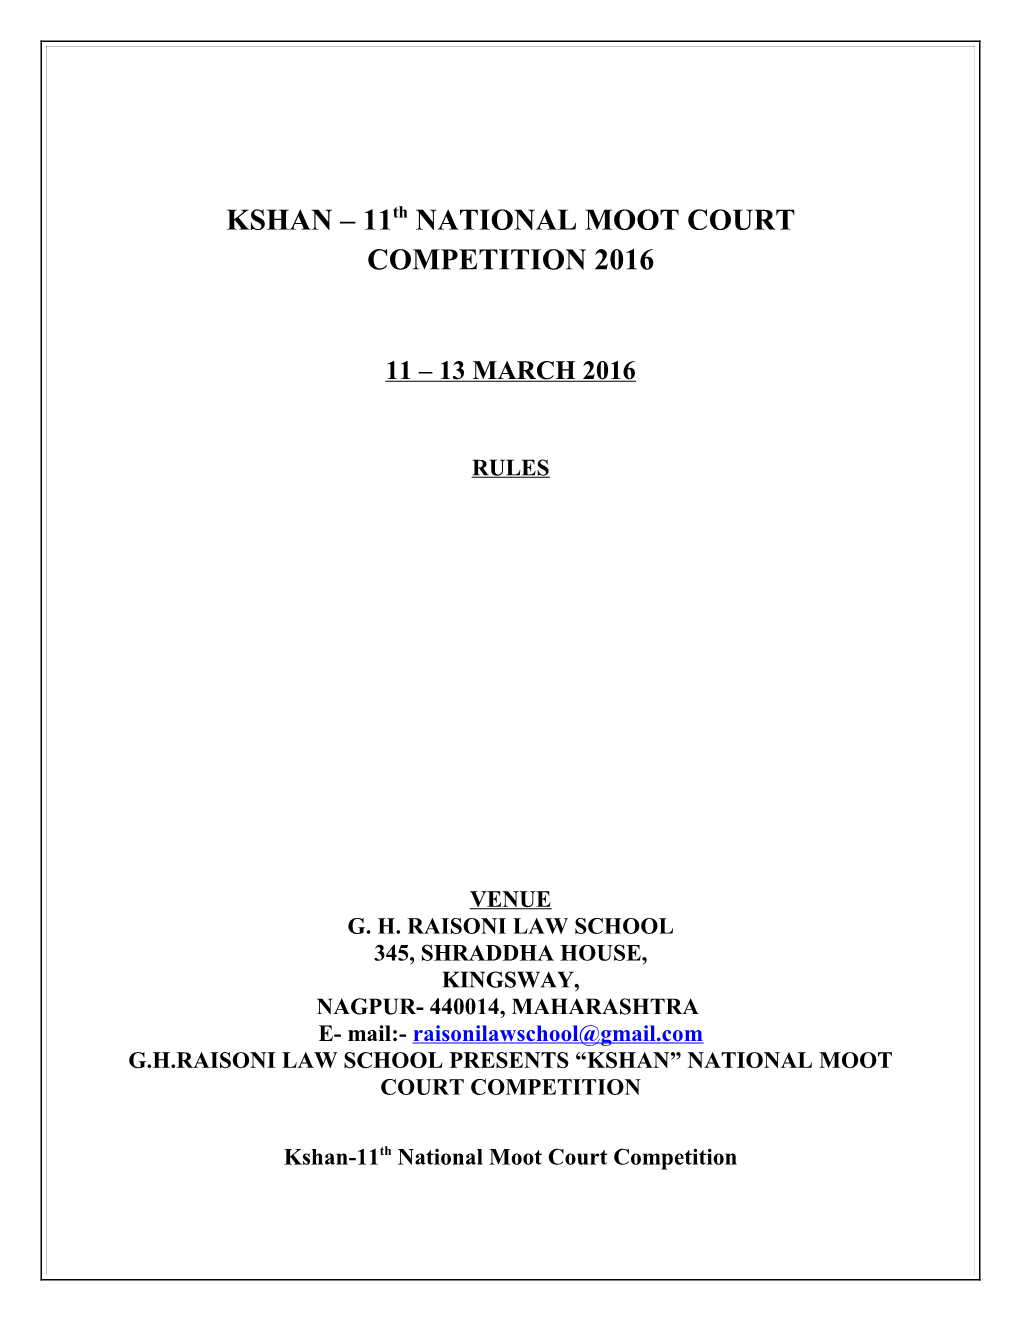 KSHAN 11Th NATIONAL MOOT COURT COMPETITION 2016